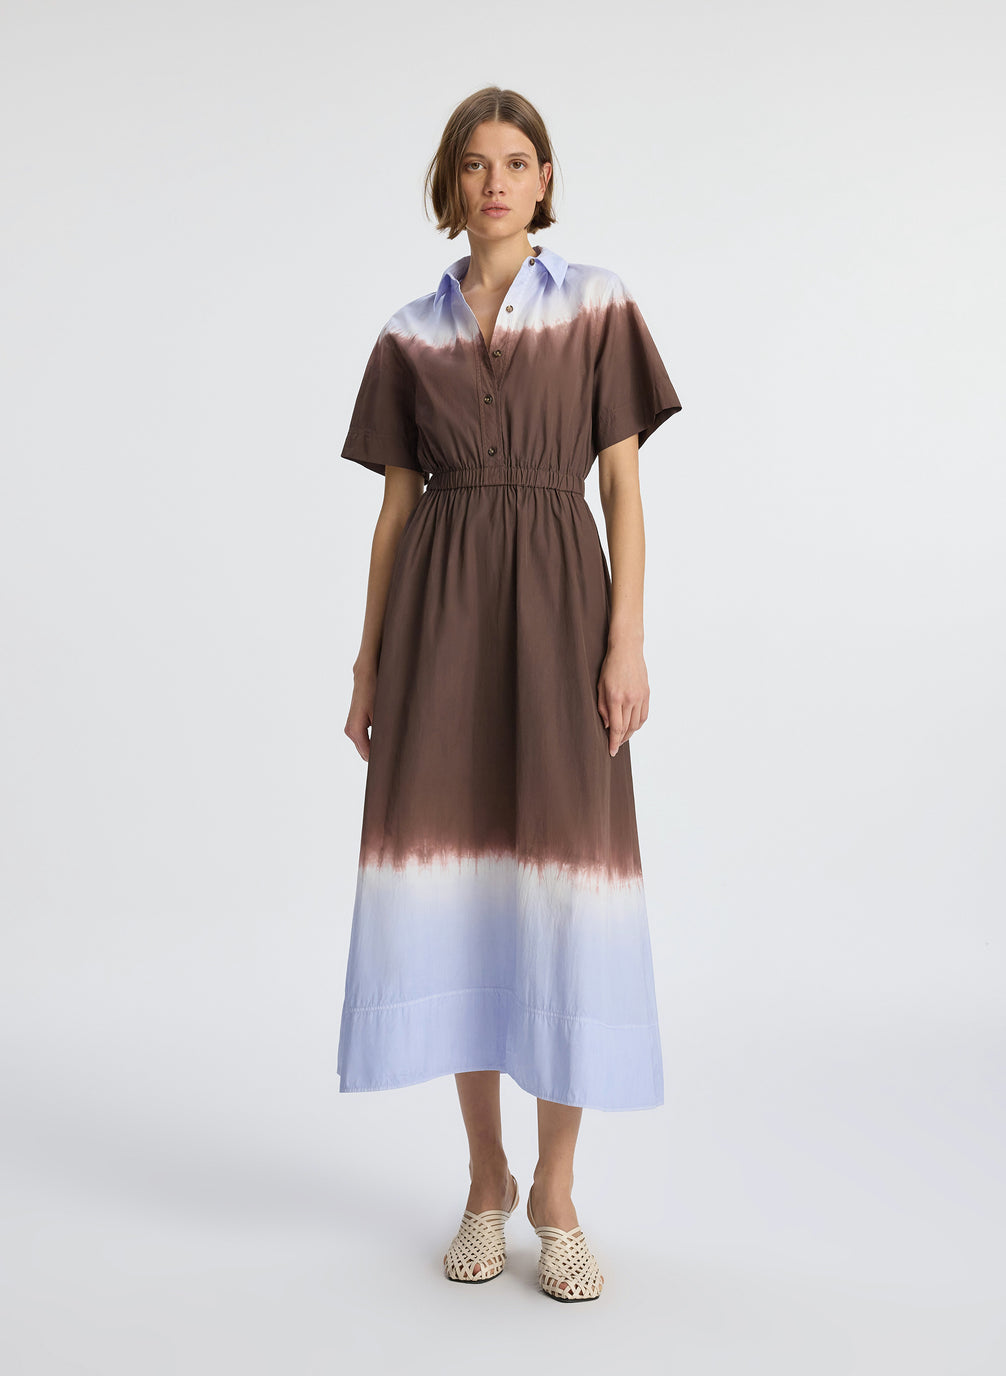 front  view of woman wearing brown and light blue dip dye shirtdress